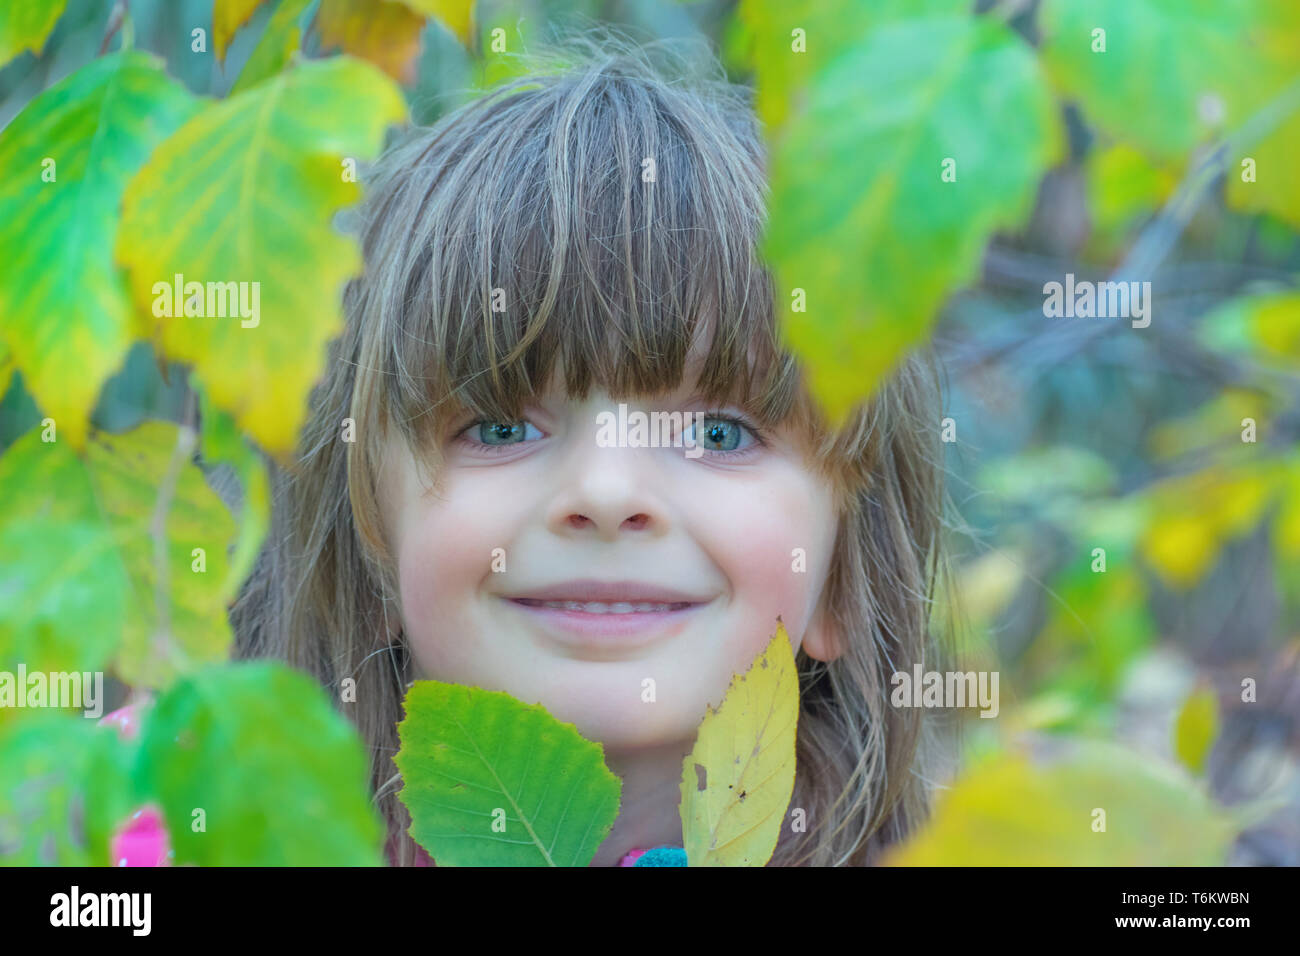 Little girl face between the leaves in the park. Stock Photo